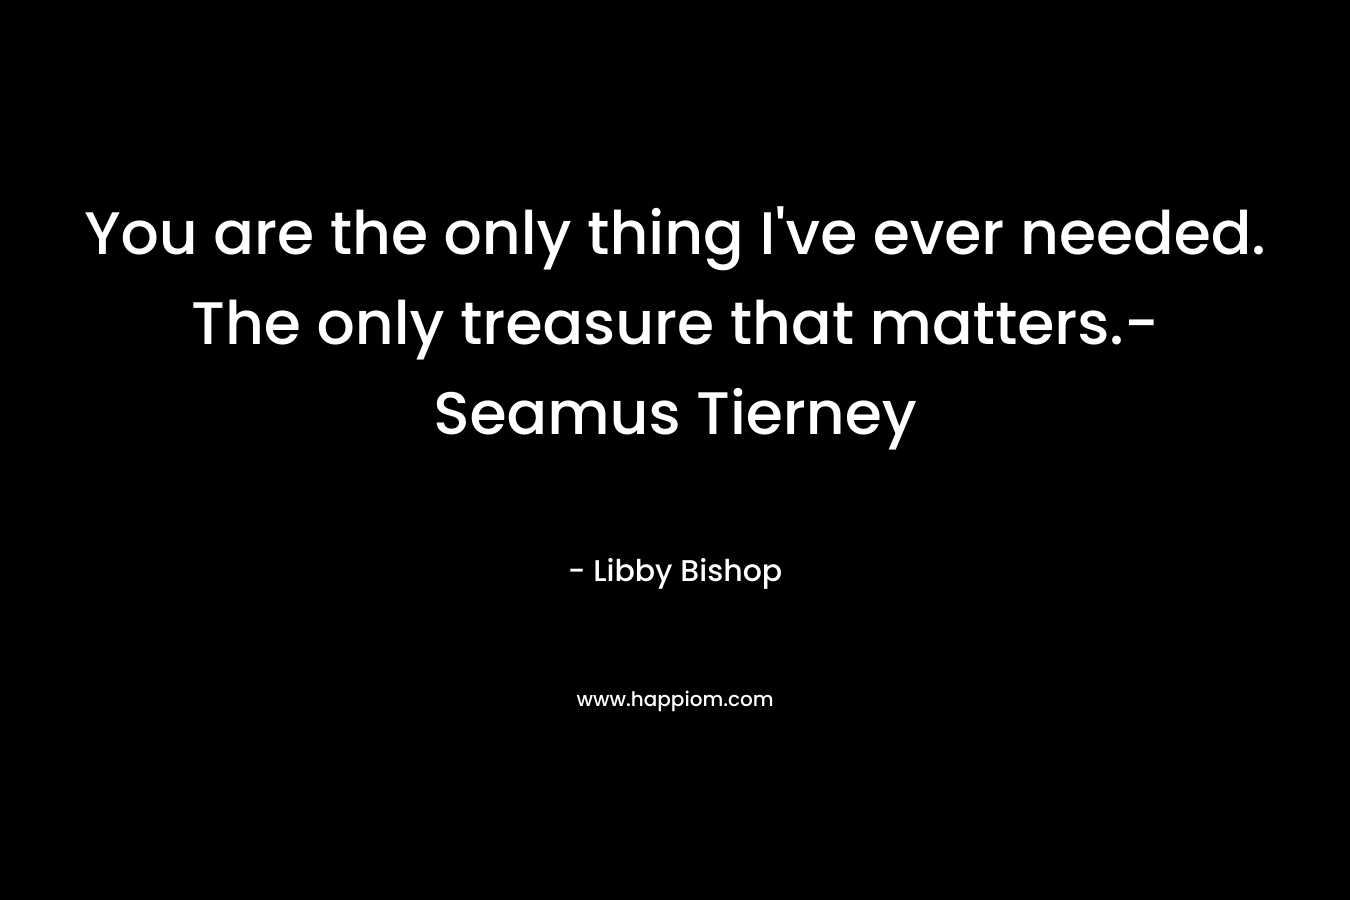 You are the only thing I've ever needed. The only treasure that matters.- Seamus Tierney